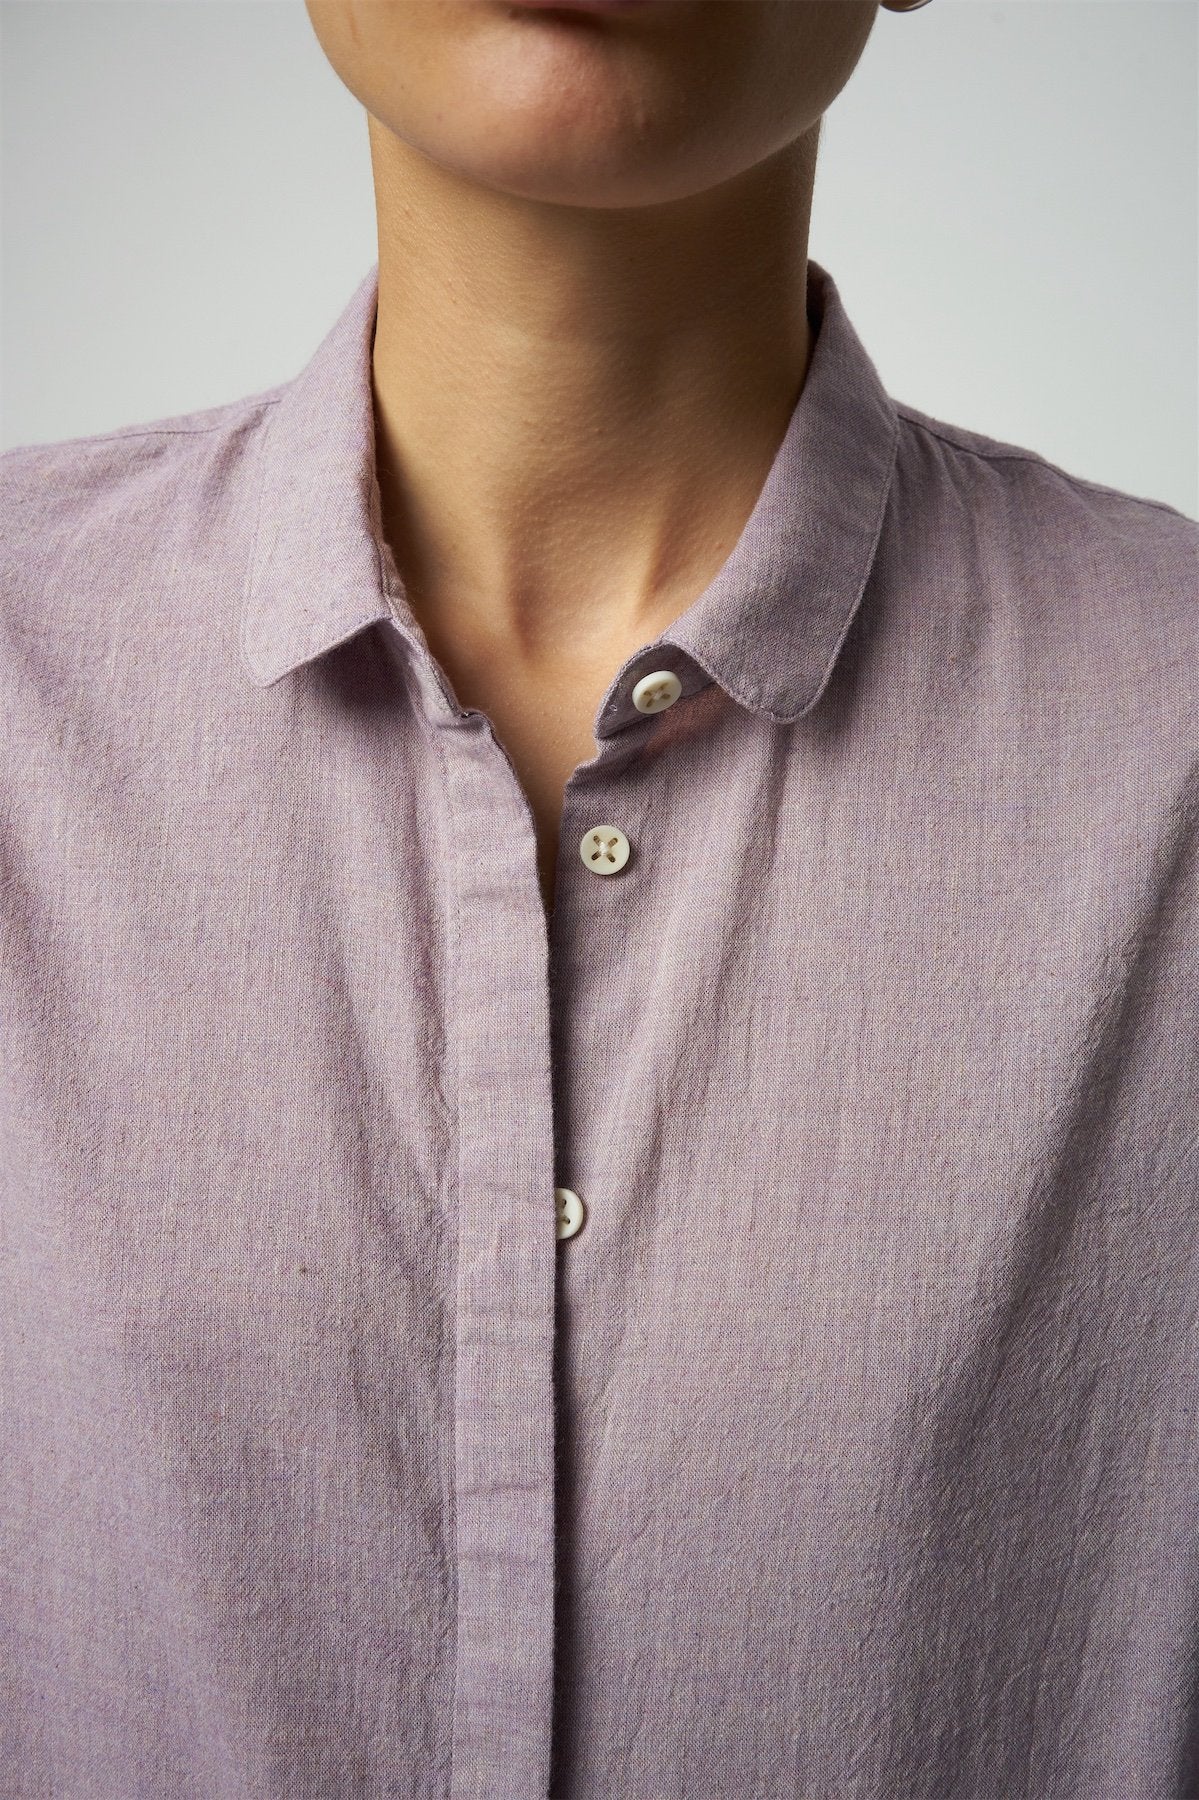 Cute Round Collar Shirt in a Purple Heather Japanese Organic Cotton and Linen